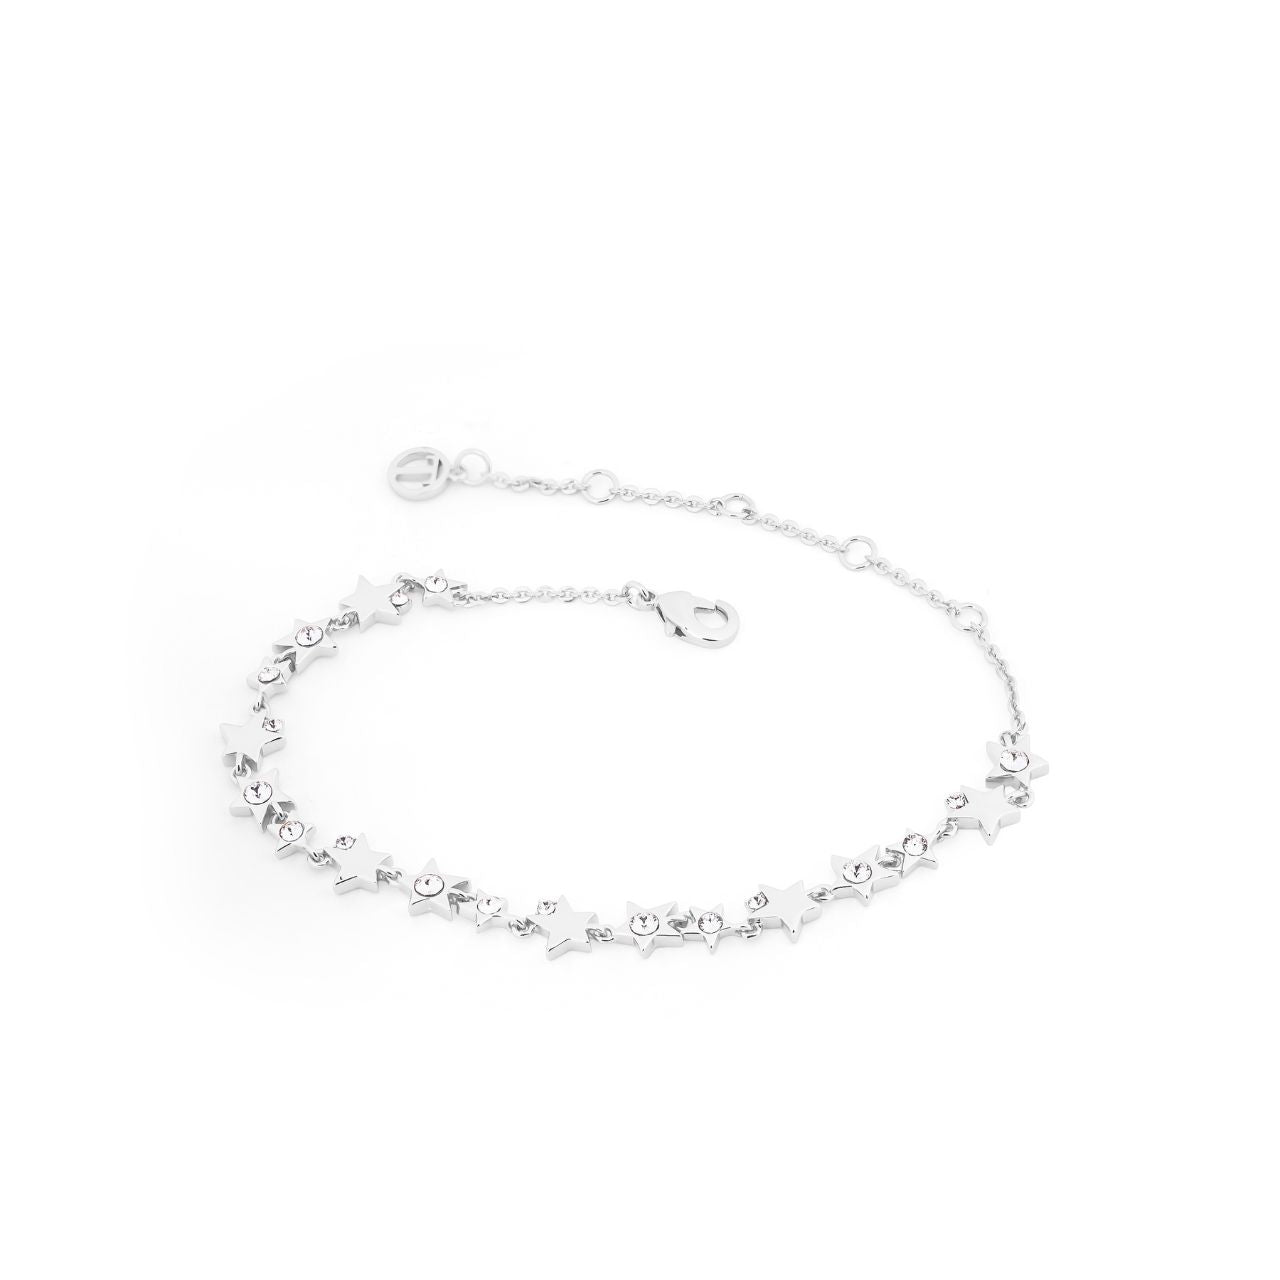 Expertly crafted by Tipperary, the Silver Shooting Star Bracelet is a must-have accessory for any fashion-forward individual. Made of silver, this bracelet features a delicate shooting star design that adds a touch of elegance to any outfit. Upgrade your style with this stunning piece.